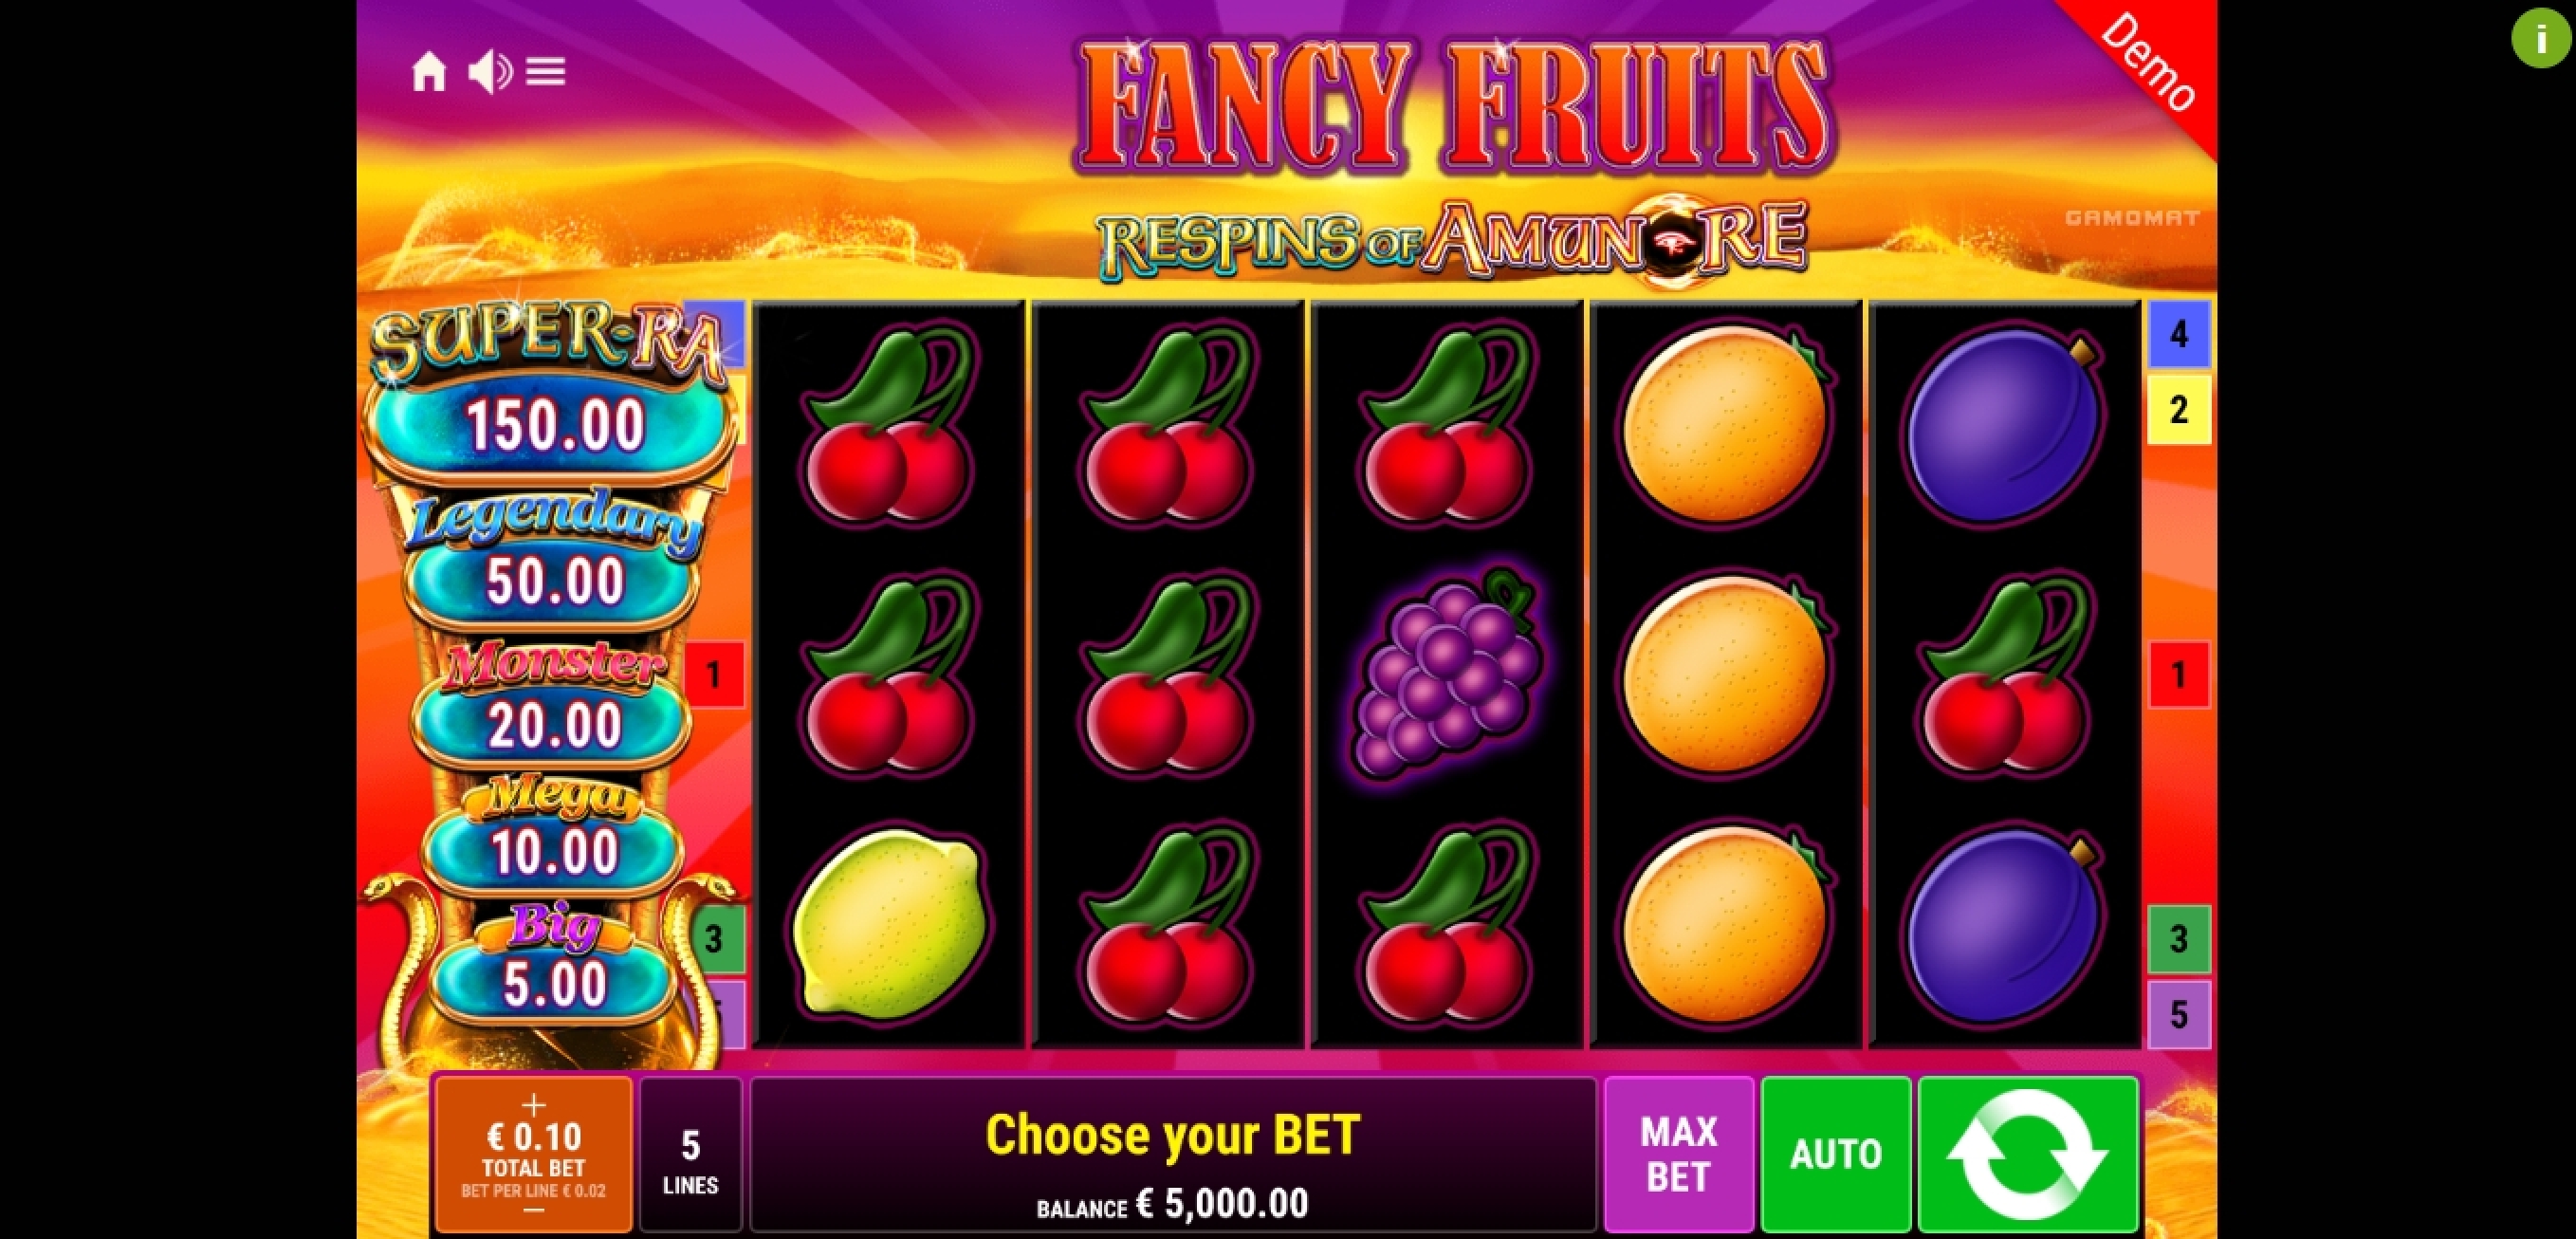 Reels in Fancy Fruits Respins Of Amun-Re Slot Game by Gamomat